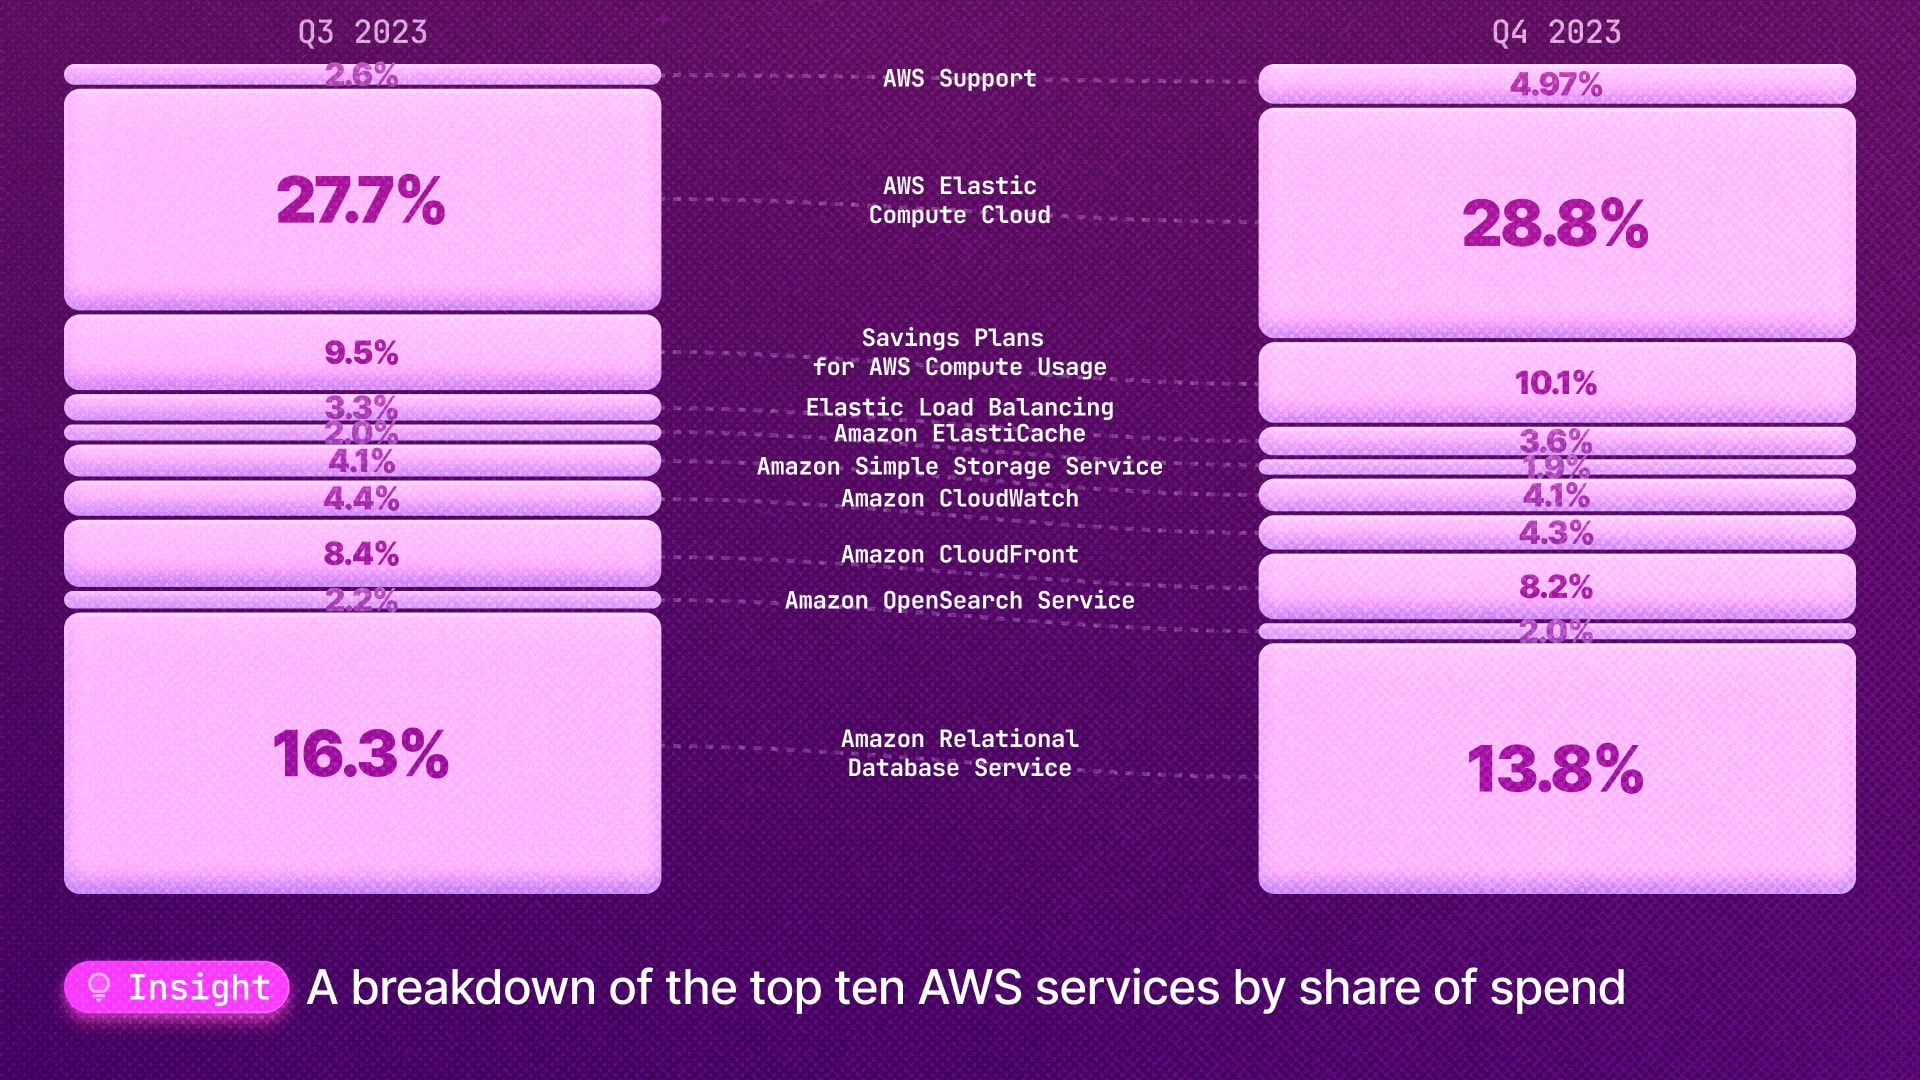 Share of spend for AWS services